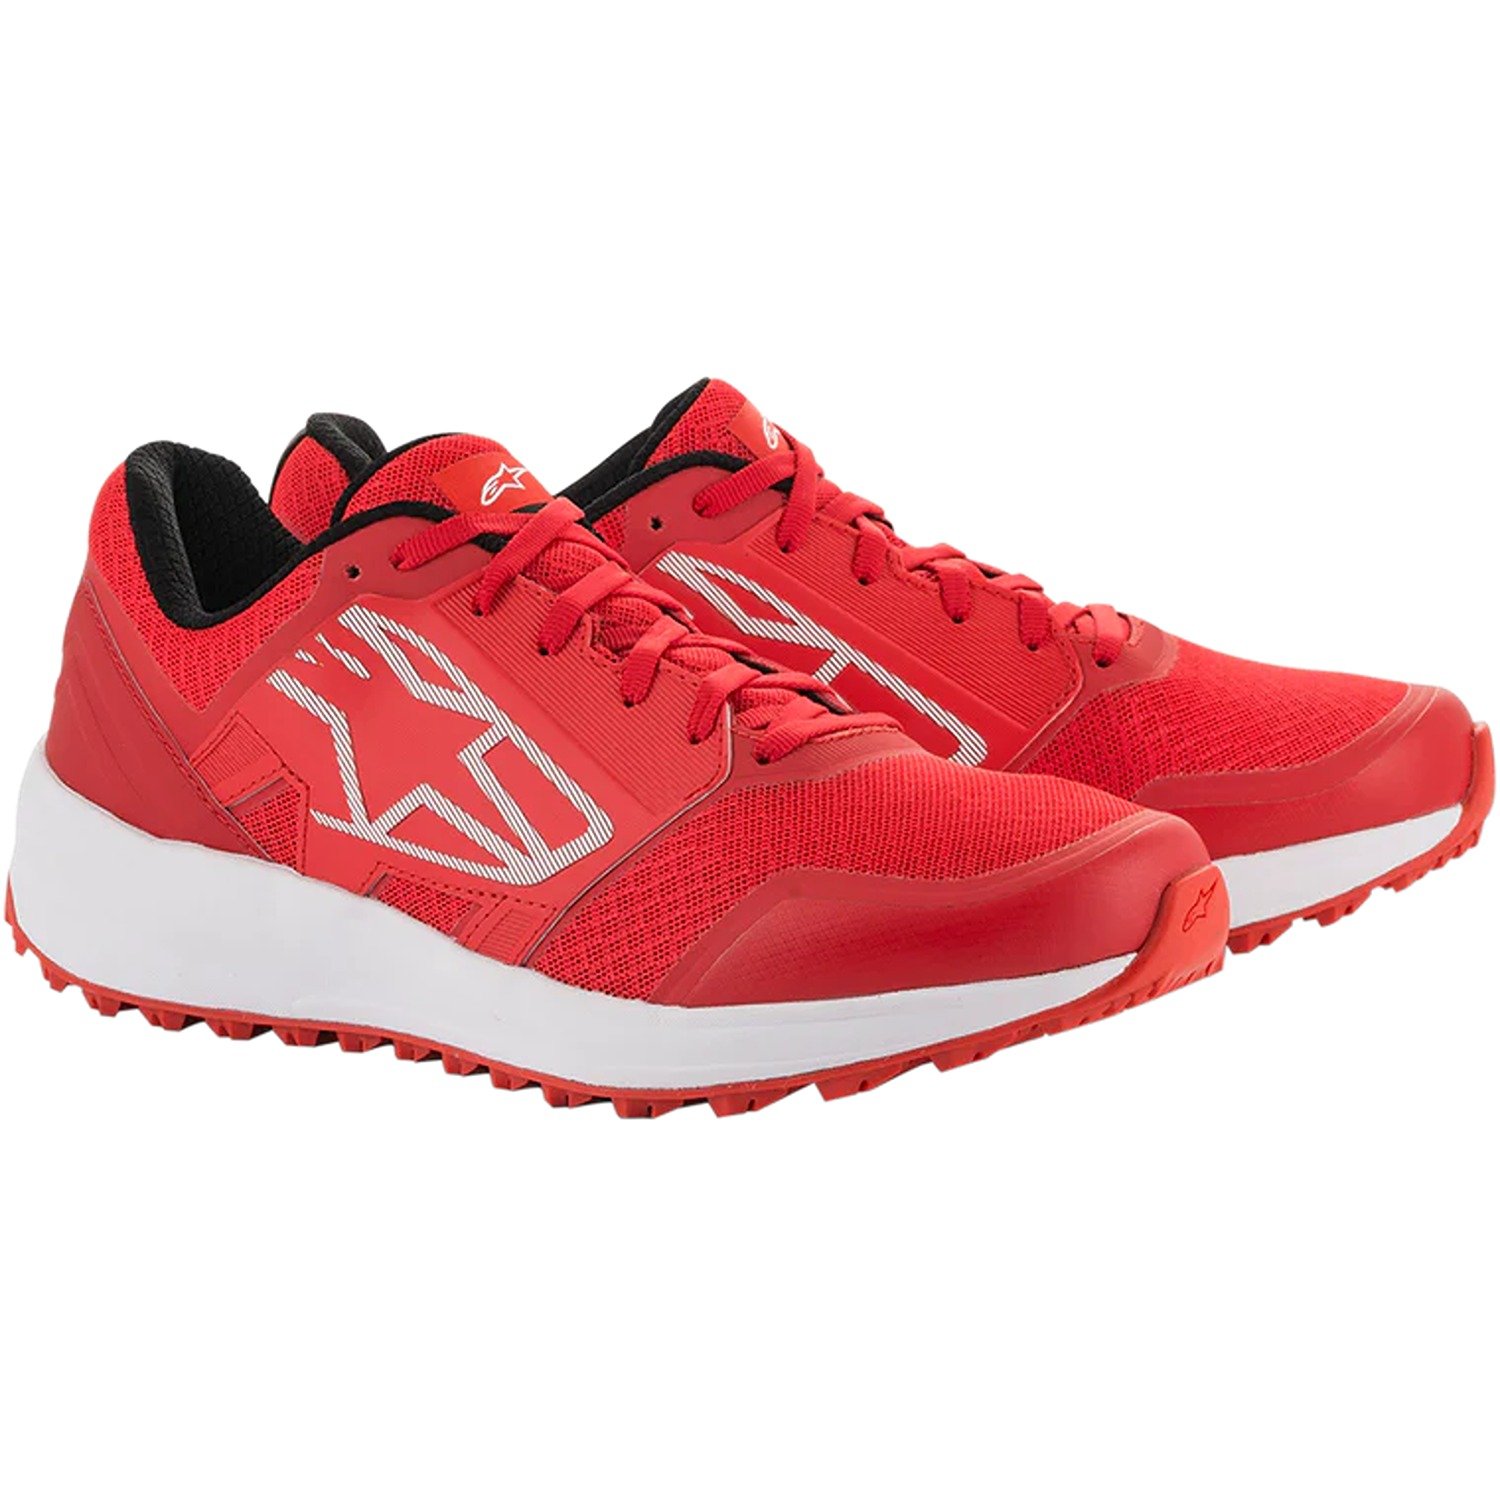 Image of Alpinestars Meta Trail Shoes Red White Taille US 85